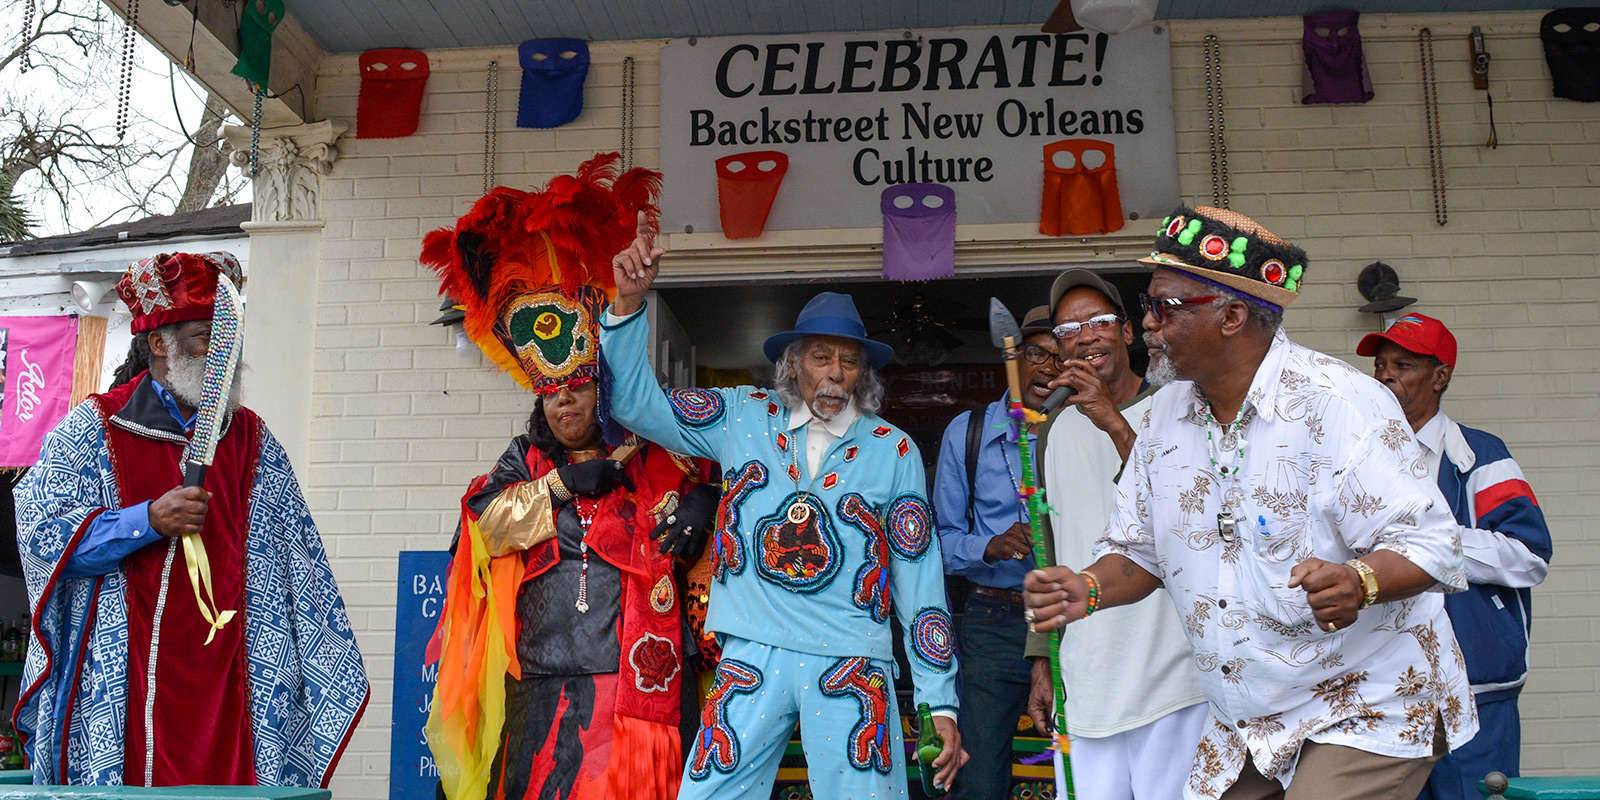 Reverend Goat Carson, Cherise Harrison Nelson and others at the Backstreet Cultural Museum on Mardi Gras 2020